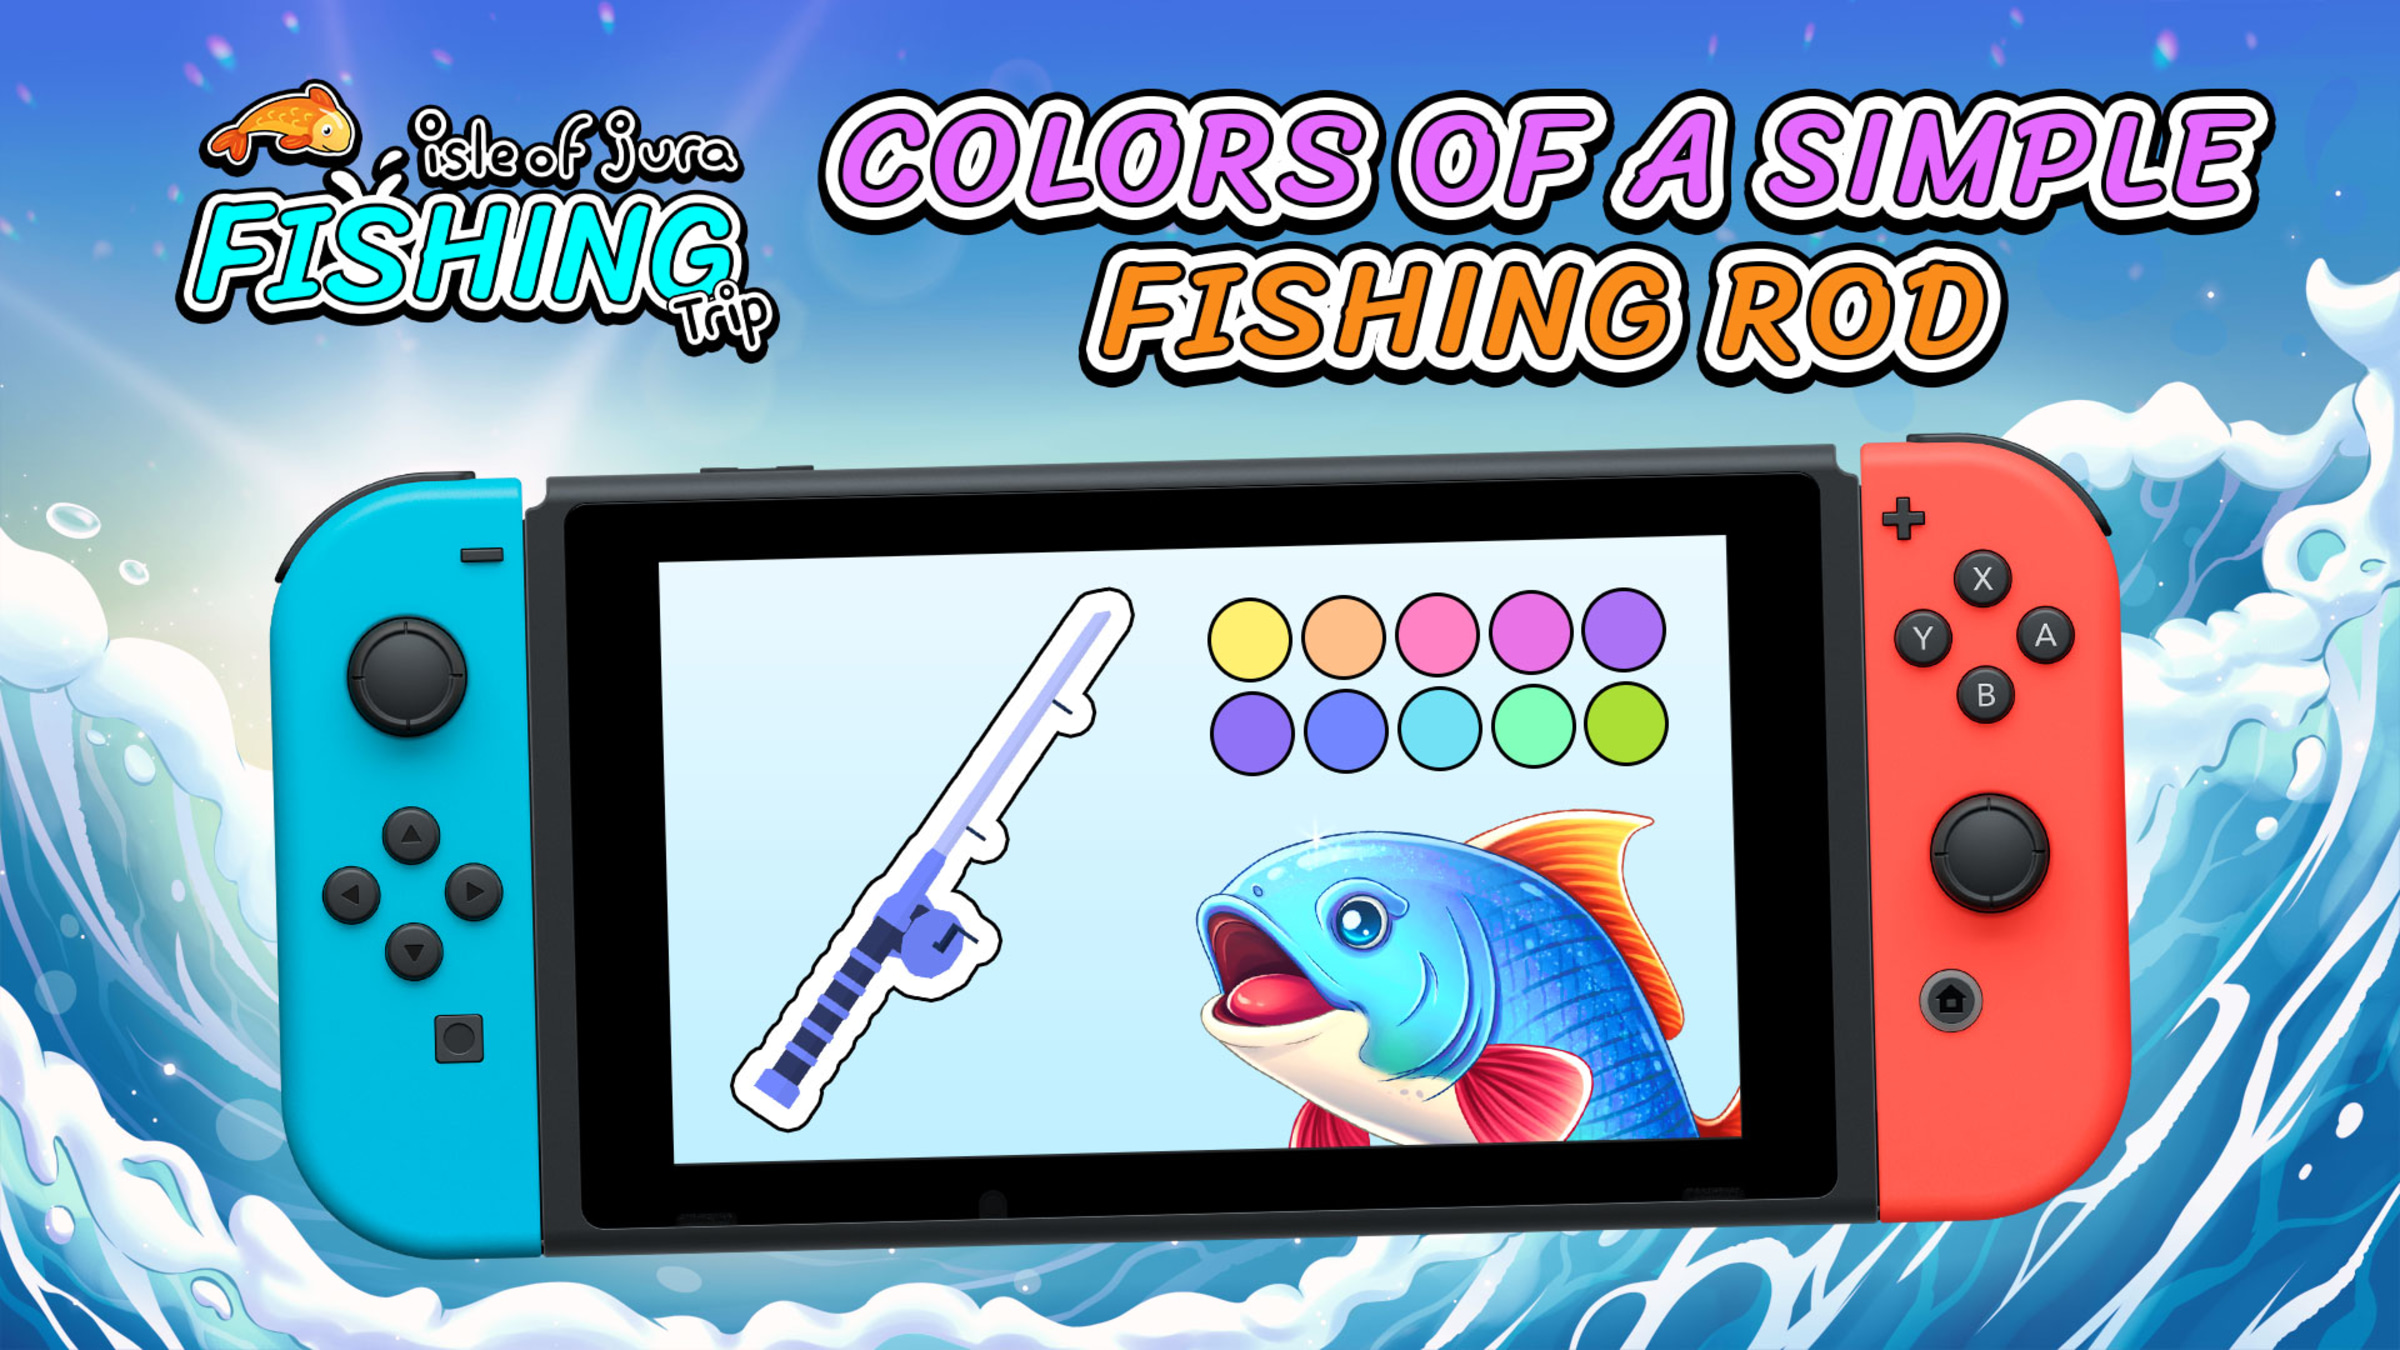 Colors of a simple fishing rod for Nintendo Switch - Nintendo Official Site